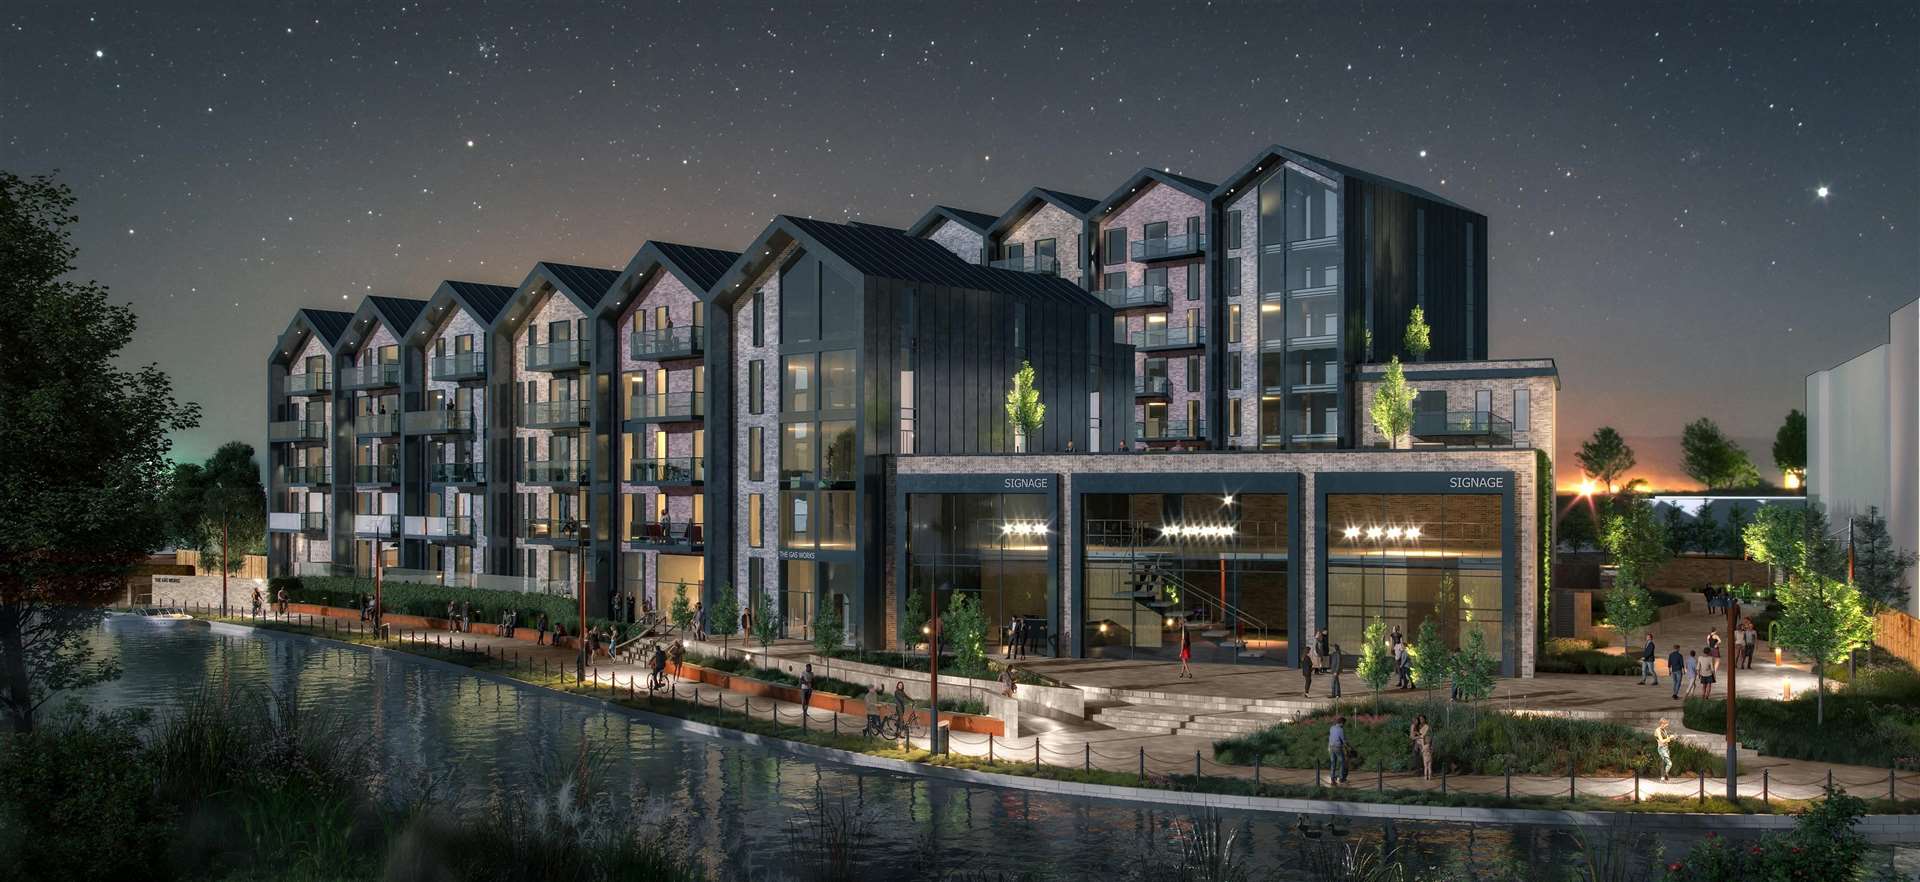 CGI of the 144 flats approved at former gas works in Tonbridge. Picture: Aberfield Communications